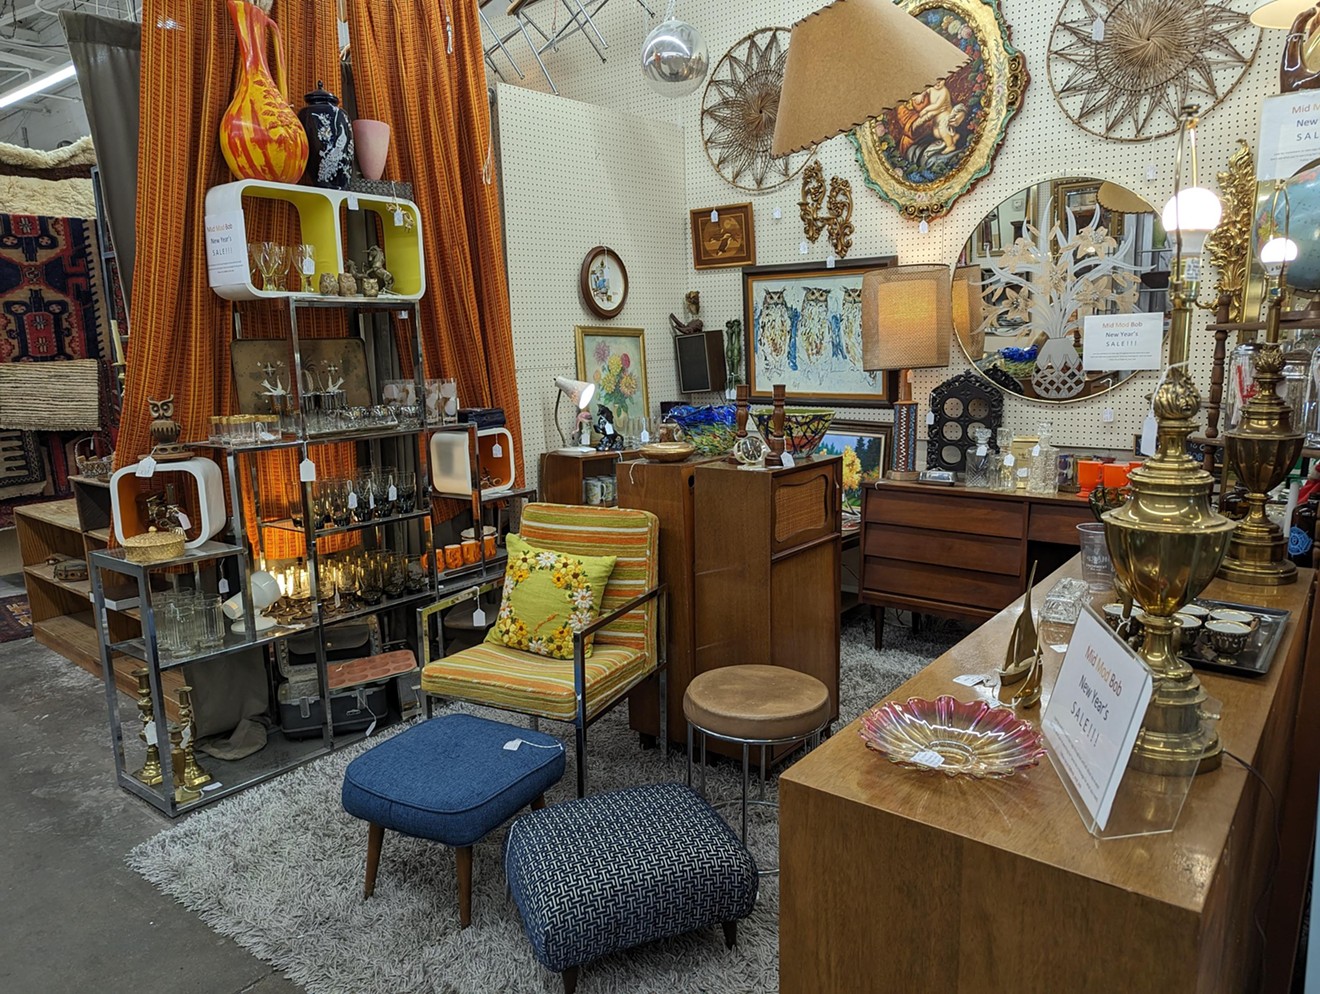 Lula B's has been fulfilling our vintage dreams for over 30 years.